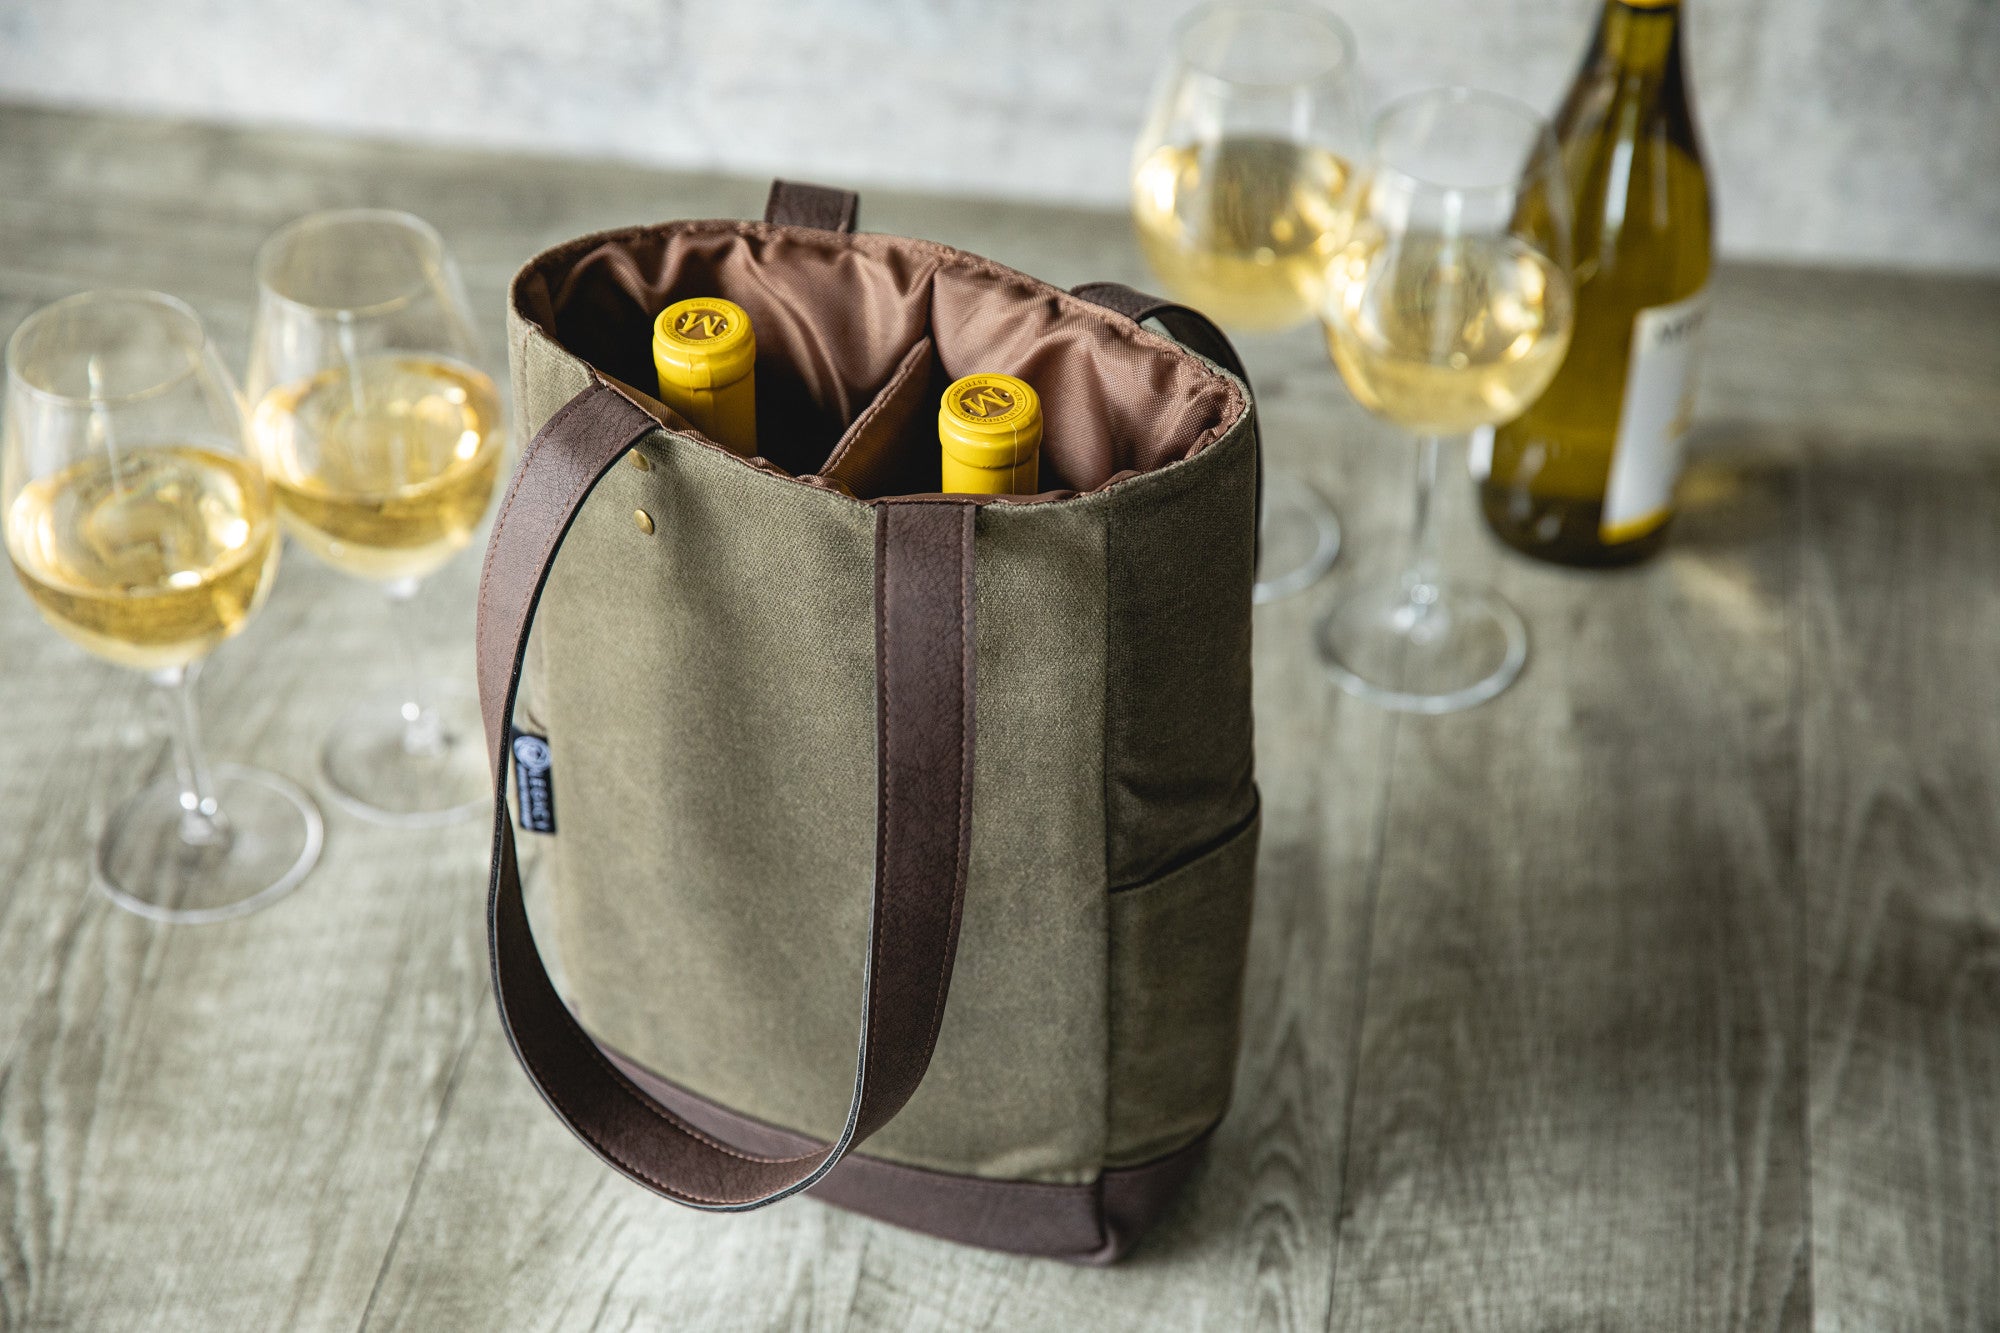 opux 2 Bottle Wine Carrier Tote, Insulated Leakproof Wine Cooler Bag, Wine  Travel Bag Tote for Picni…See more opux 2 Bottle Wine Carrier Tote